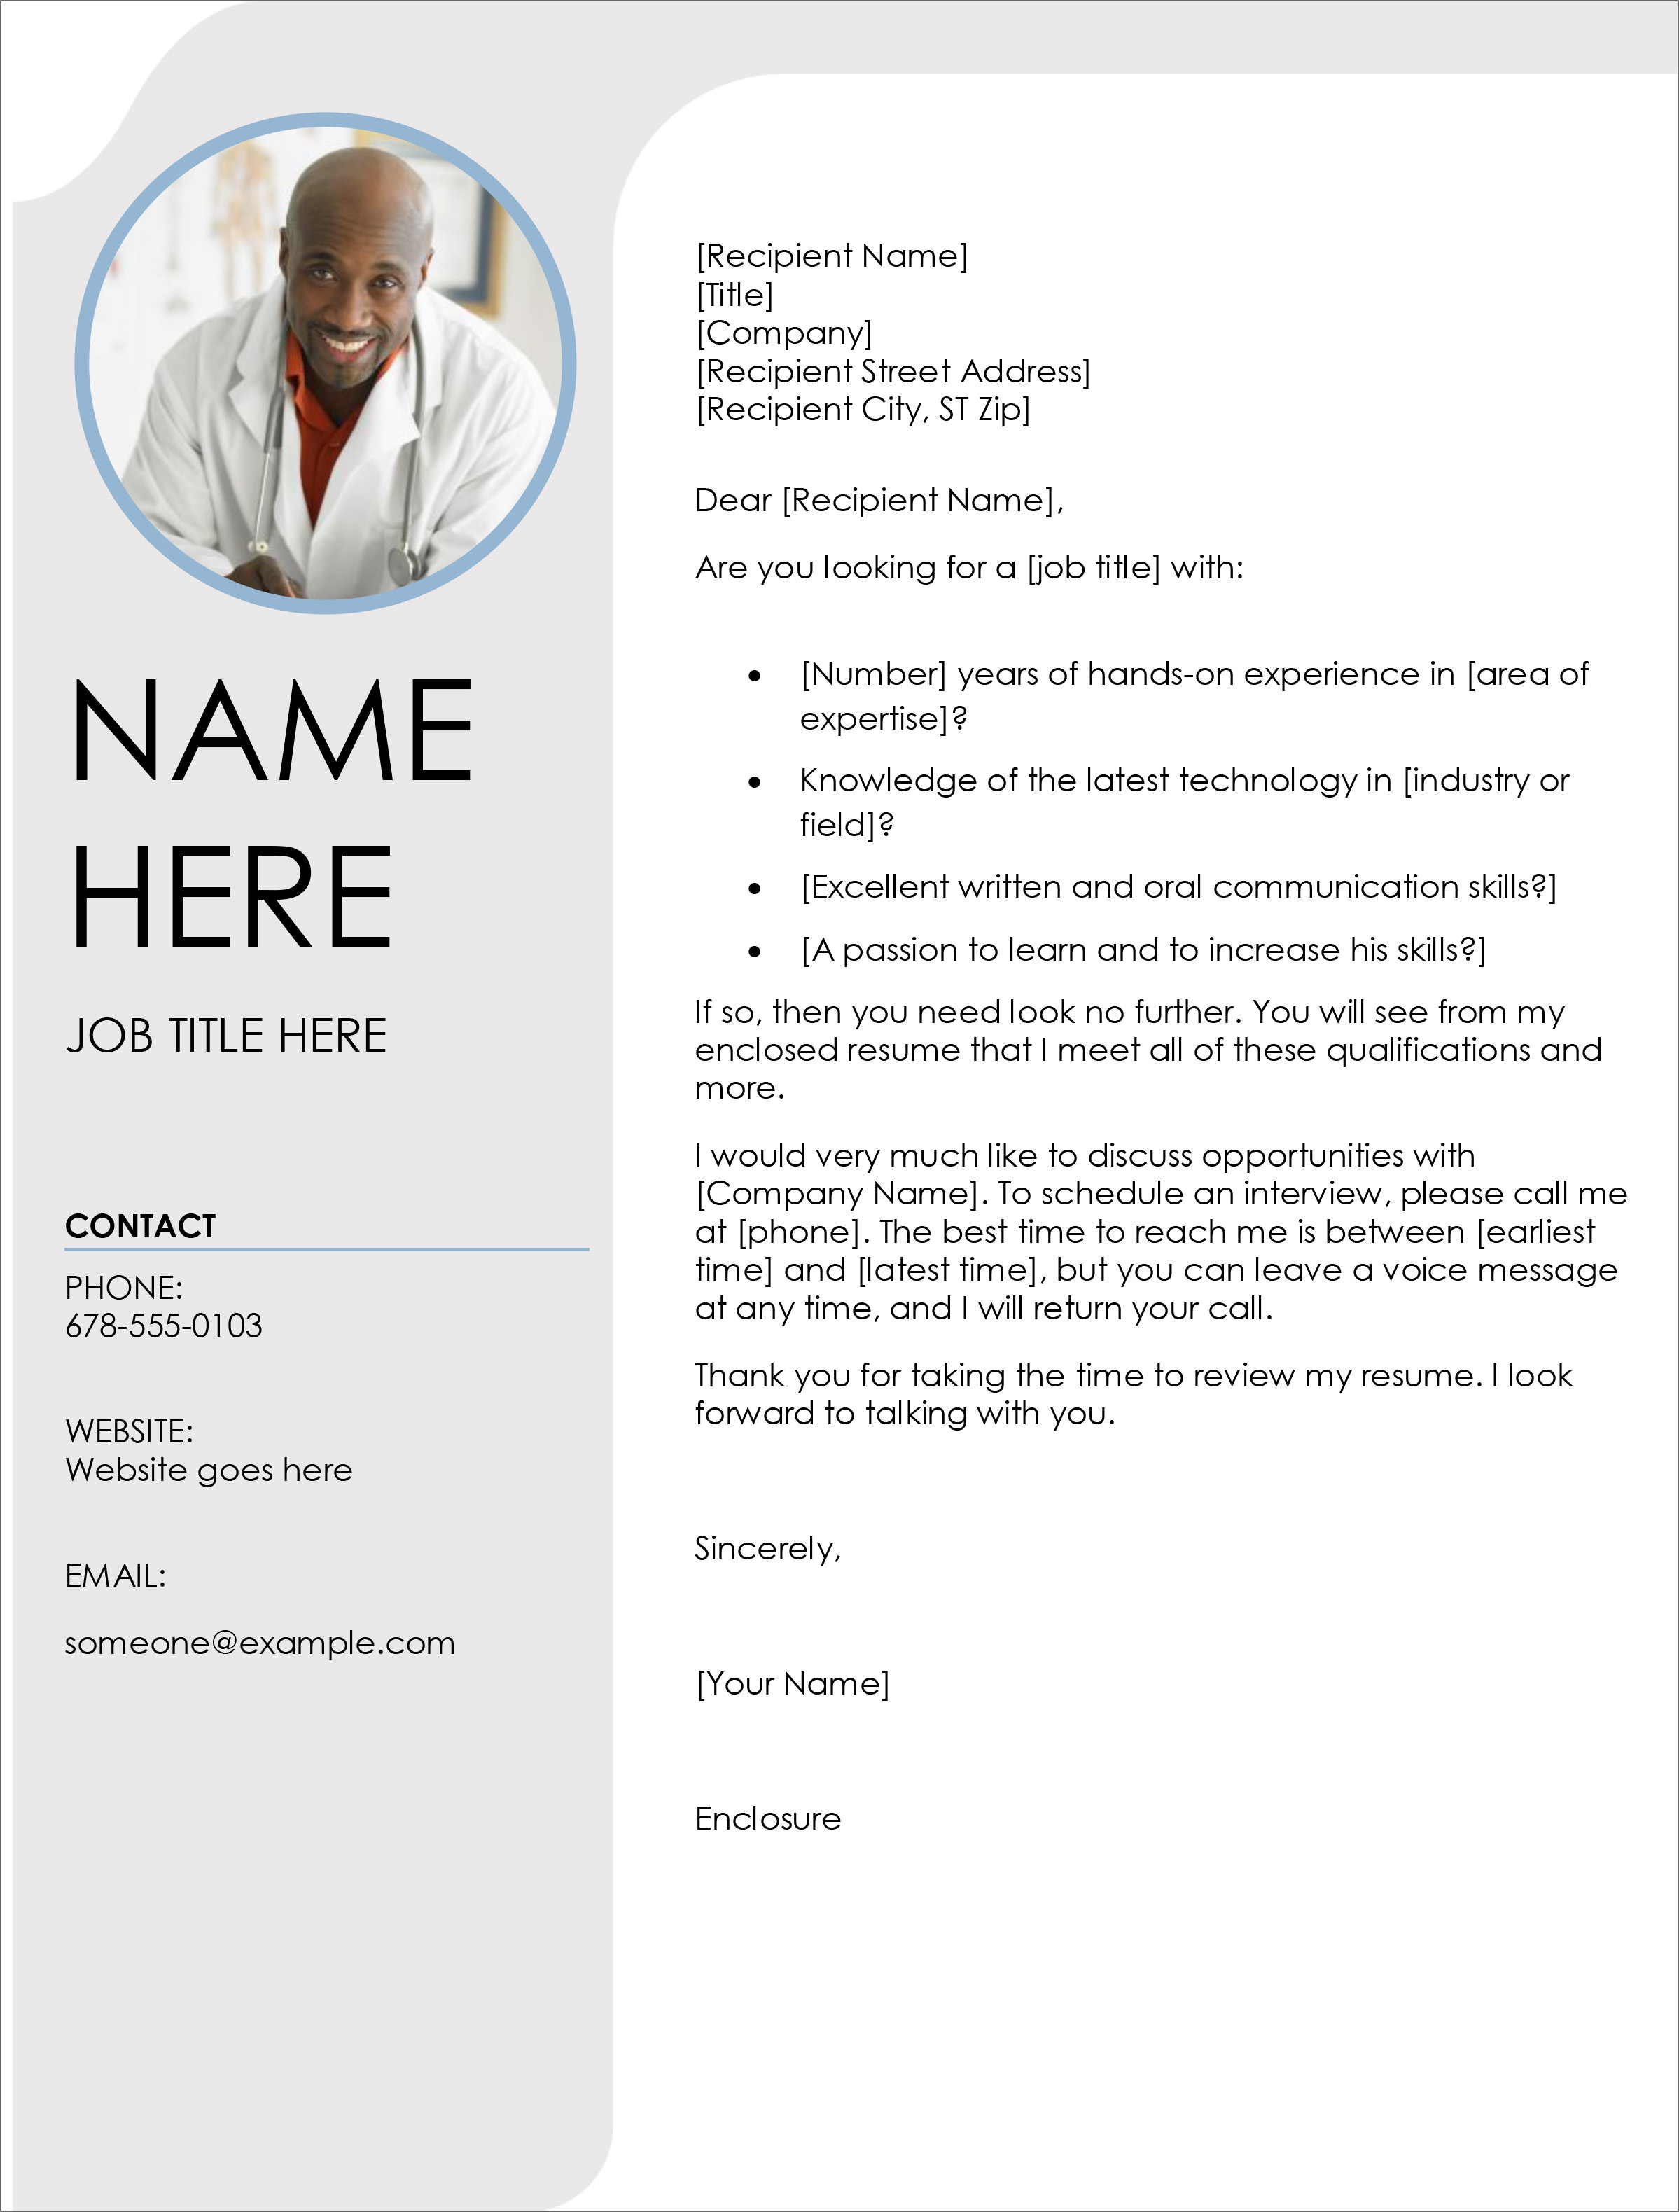 Microsoft Word Cover Letter Templates from cdn3.geckoandfly.com